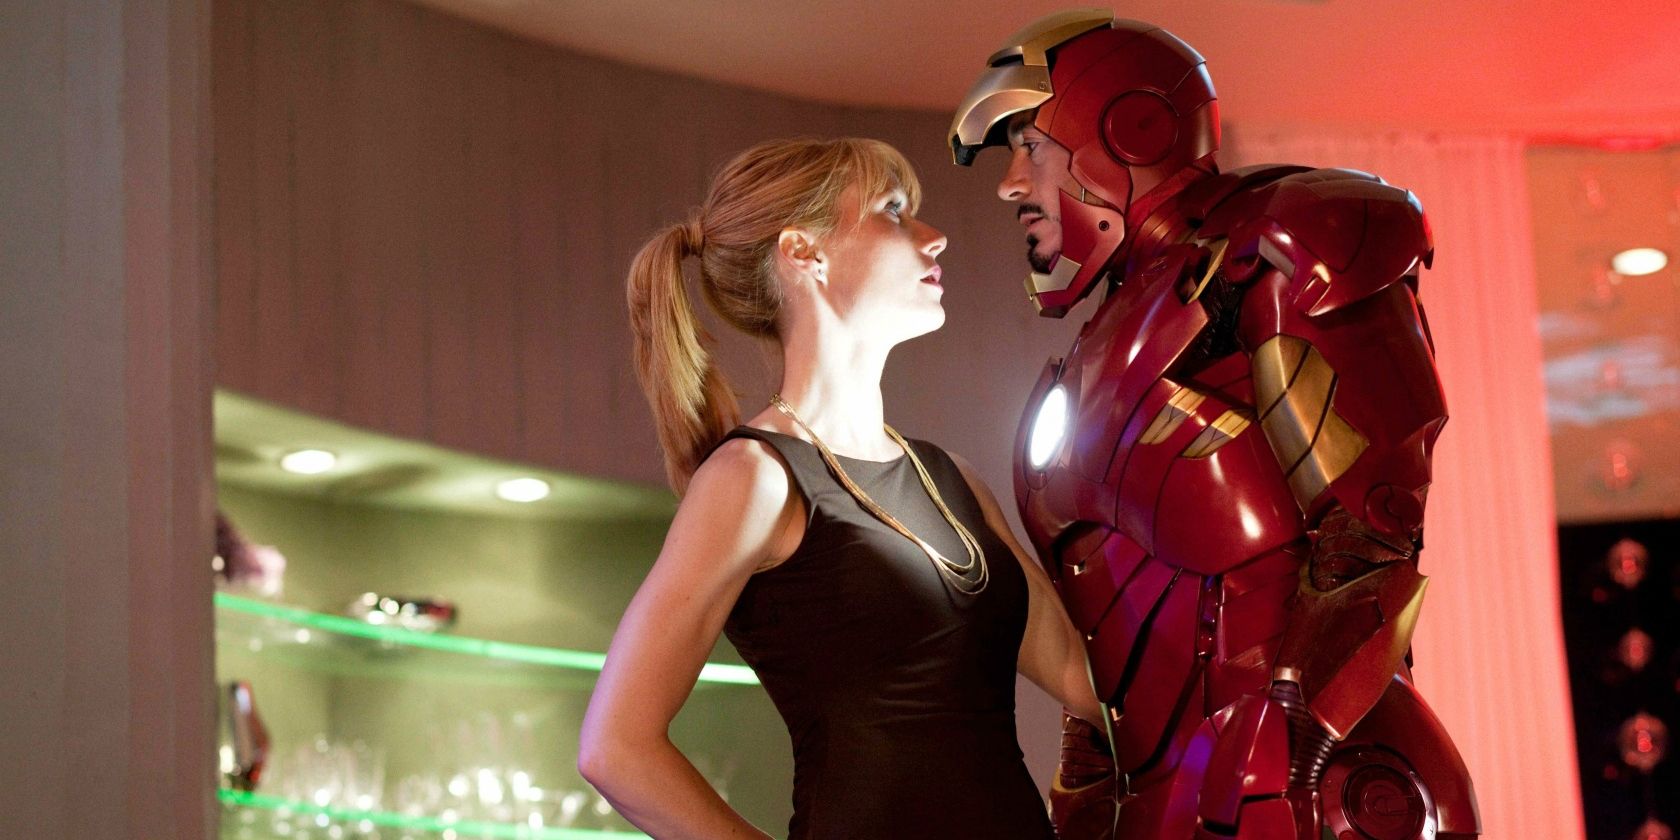 Tony Stark in his Iron Man suit talks to Pepper Potts at his birthday party in Iron Man 2